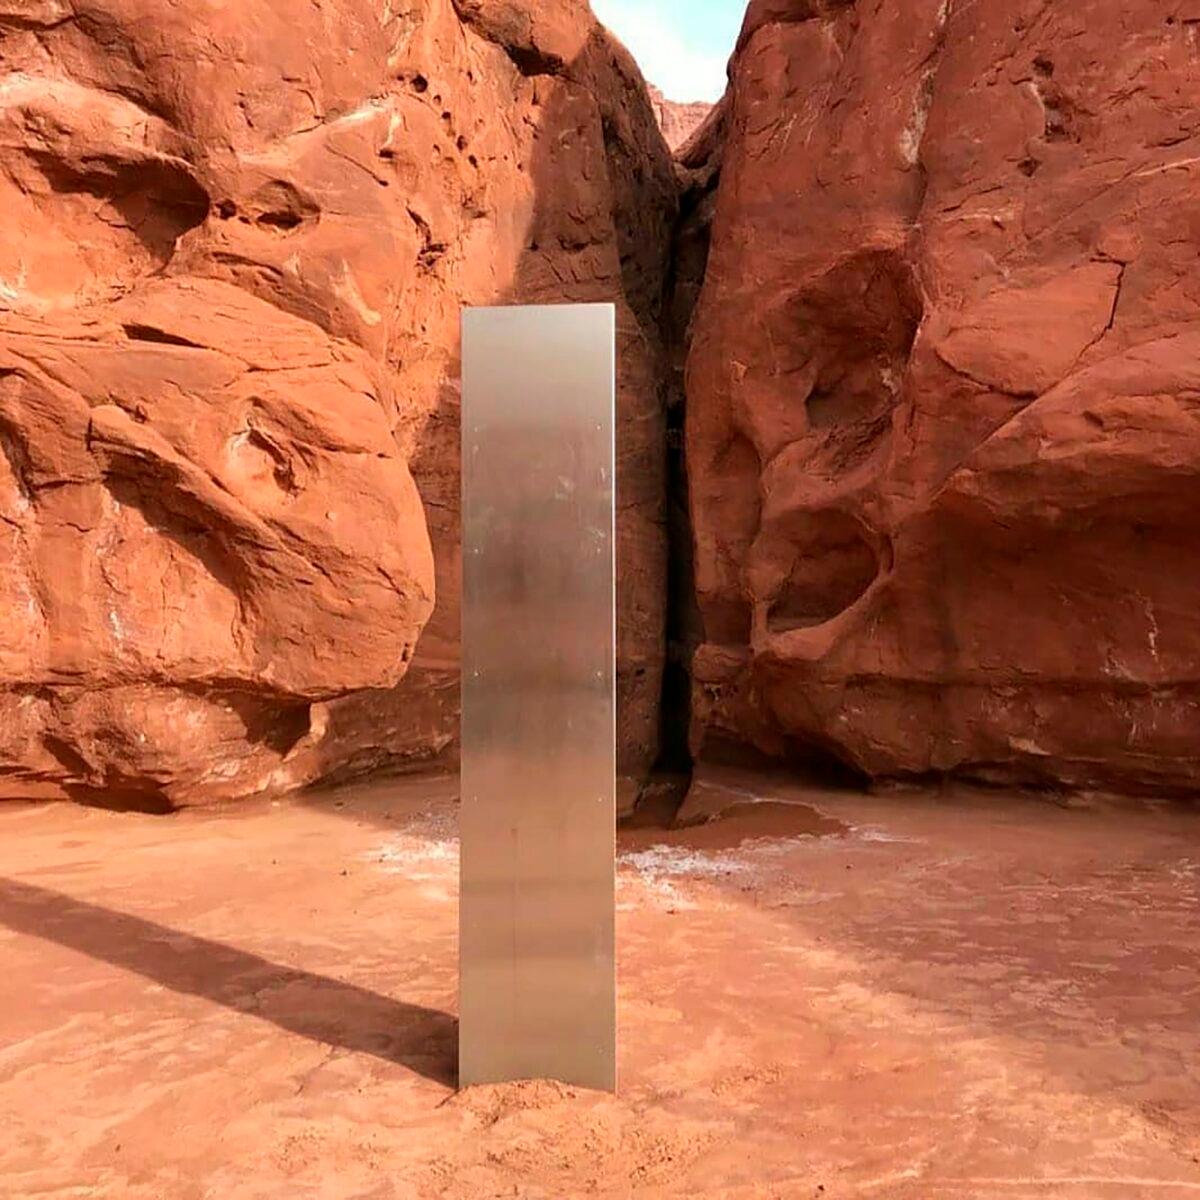 A metal monolith in the ground in a remote area of red rock in Utah. (Utah Department of Public Safety via AP)